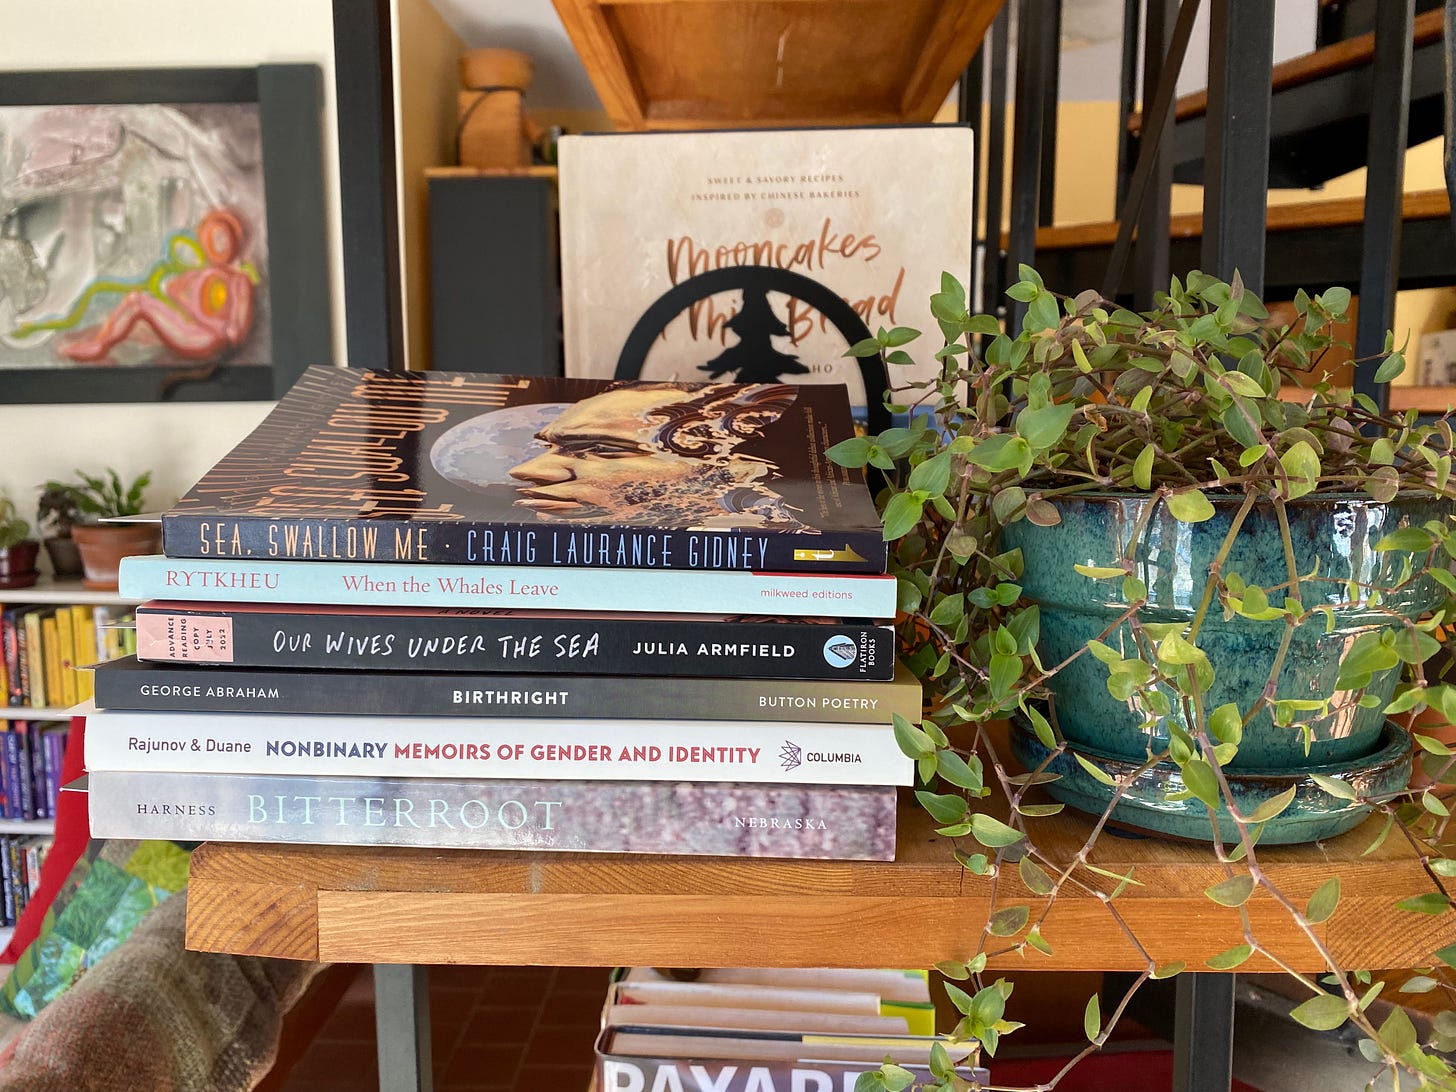 A stack of books on the end of a wooden bookshelf next to a plant with trailing green leaves in a small green pot. There is a cookbook standing upright on the shelf behind the book stack, and a painting on the wall and another bookcase visible in the background. The books are: Bitterroot, Nonbinary: Memoirs of Gender and Identity, Birthright, Our Wives Under the Sea, When the Whales Leave, and Sea, Swallow Me.